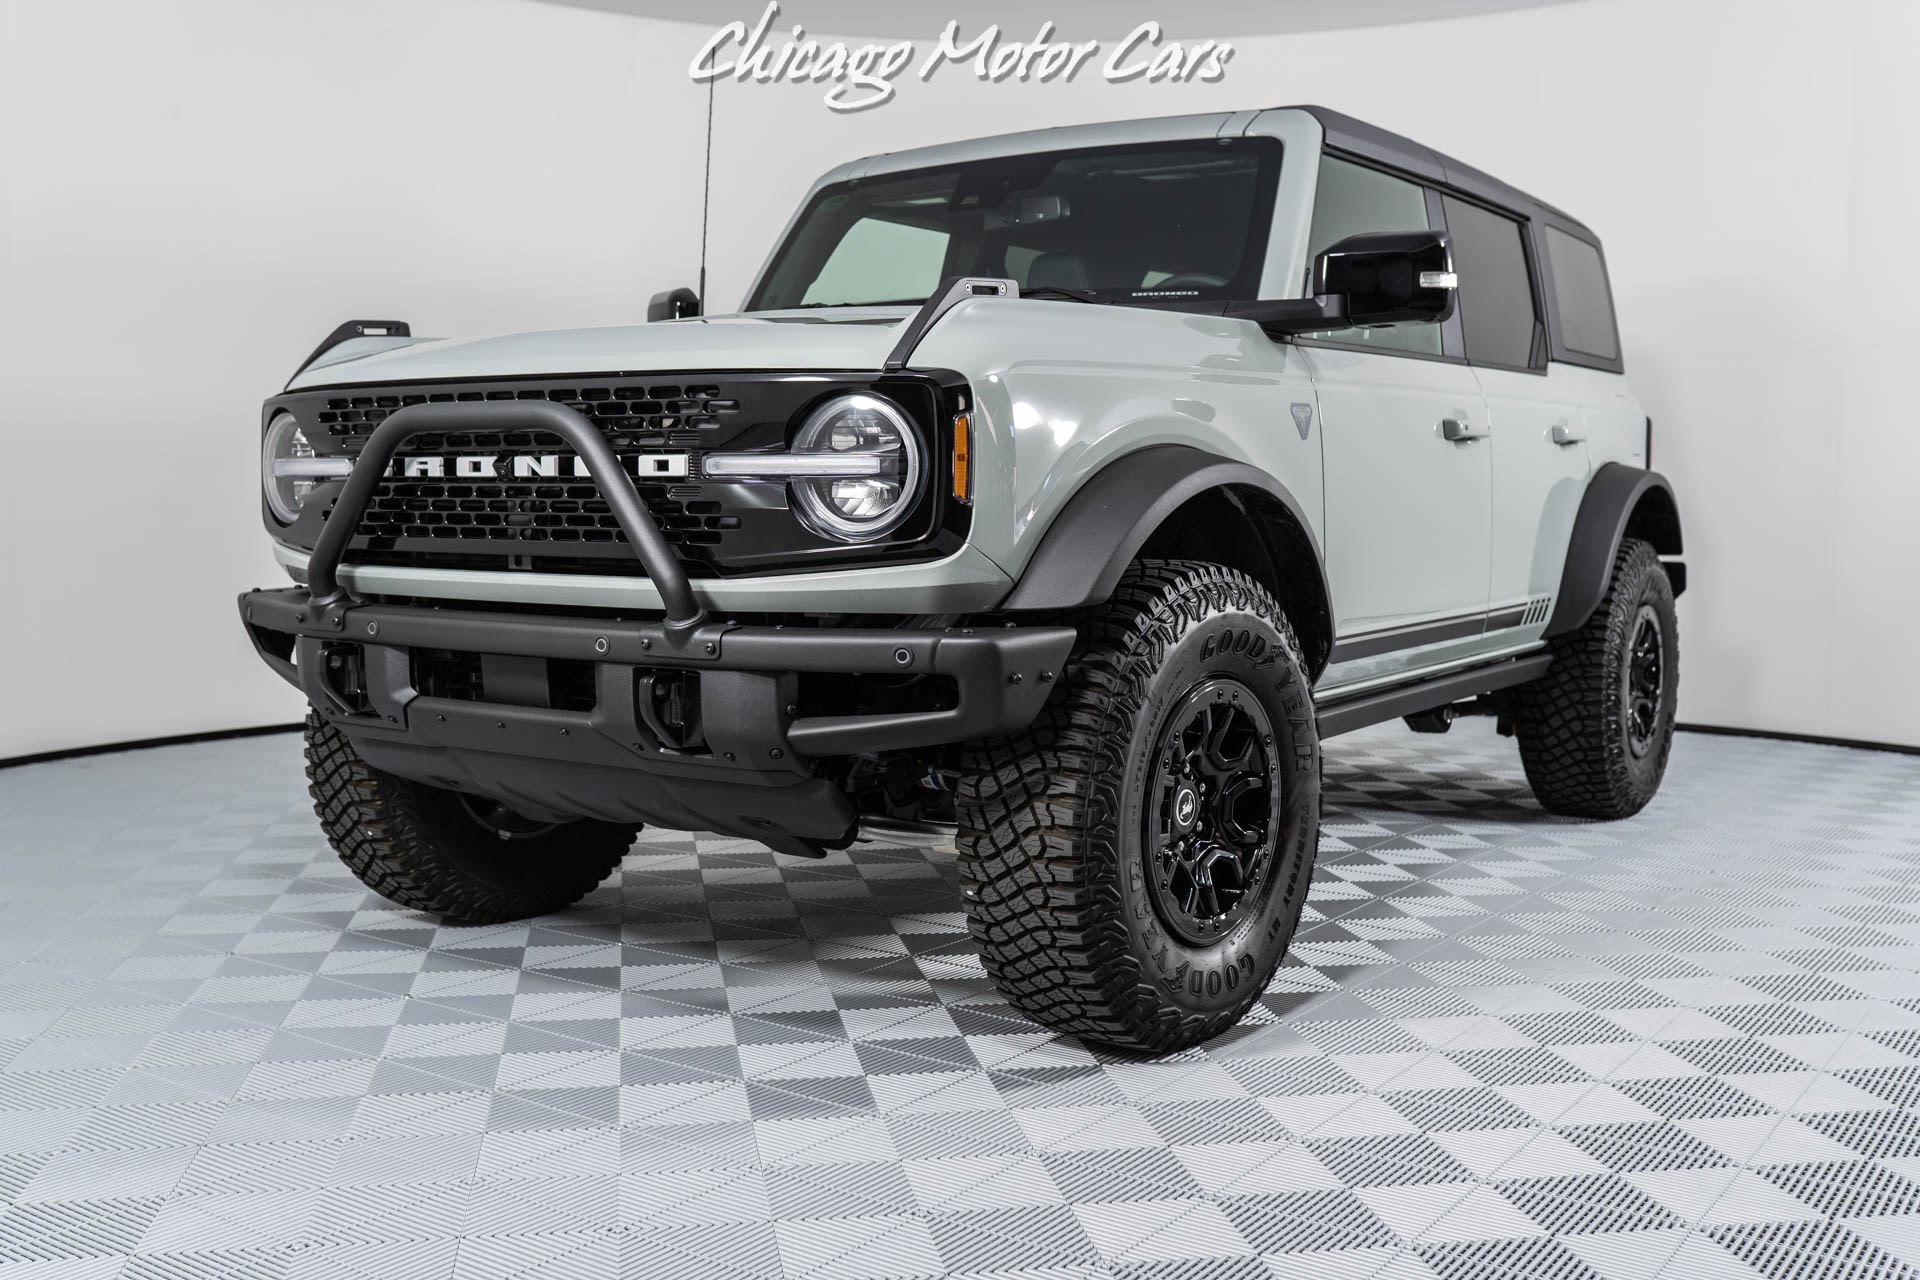 Used-2021-Ford-Bronco-First-Edition-Advanced-V6-Engine-10-Speed-Auto-Transmission-ONLY-73-Miles